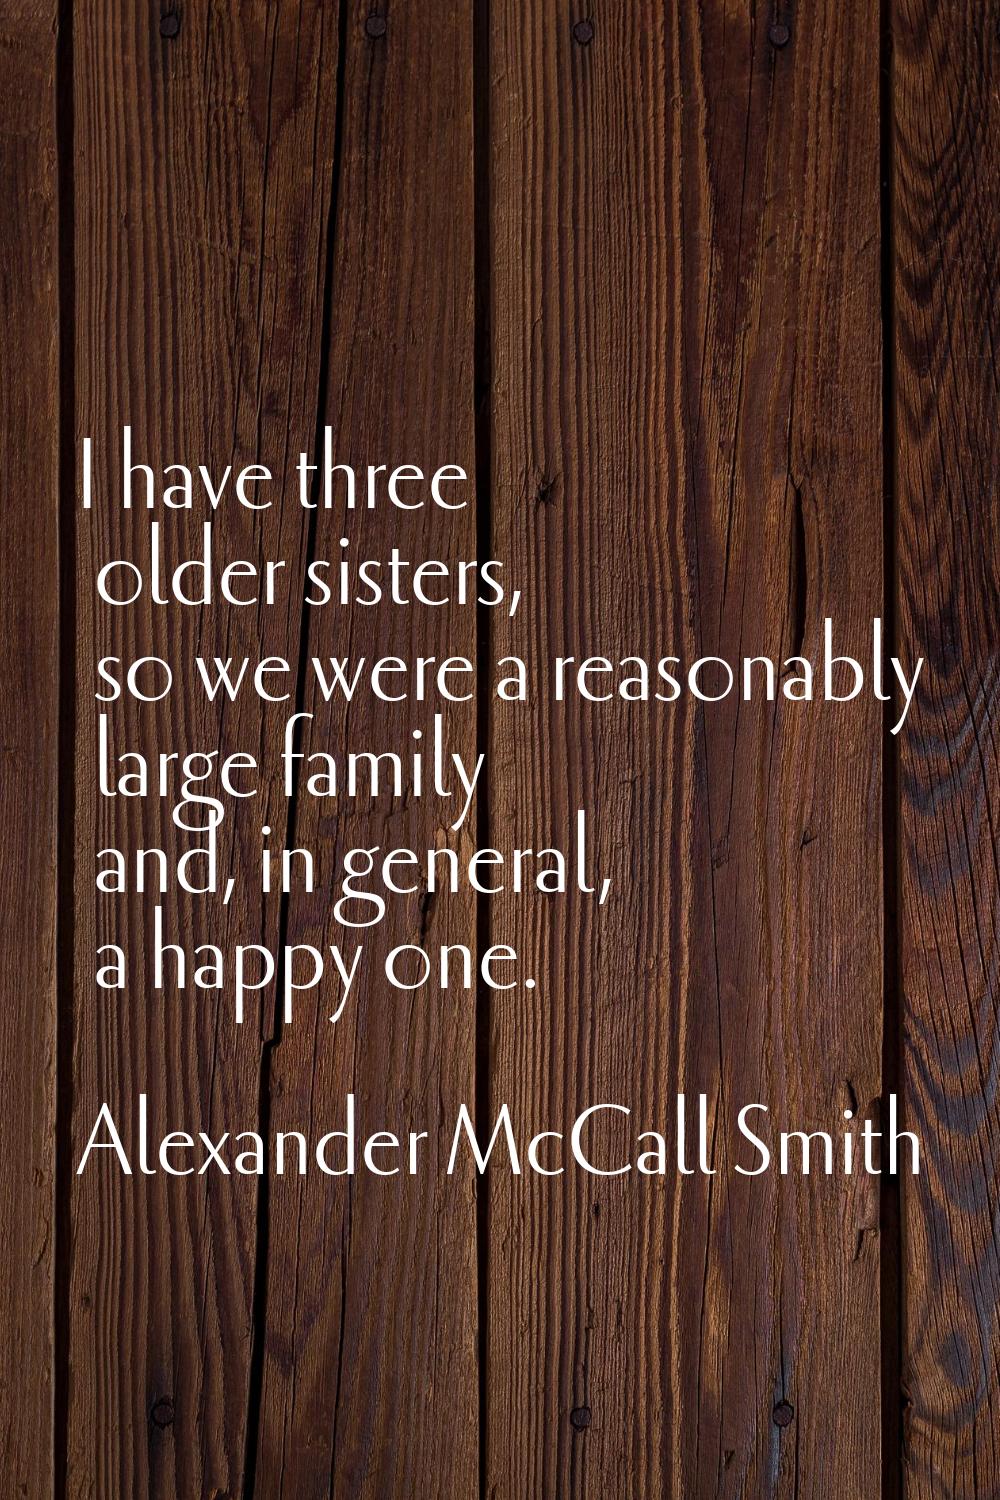 I have three older sisters, so we were a reasonably large family and, in general, a happy one.